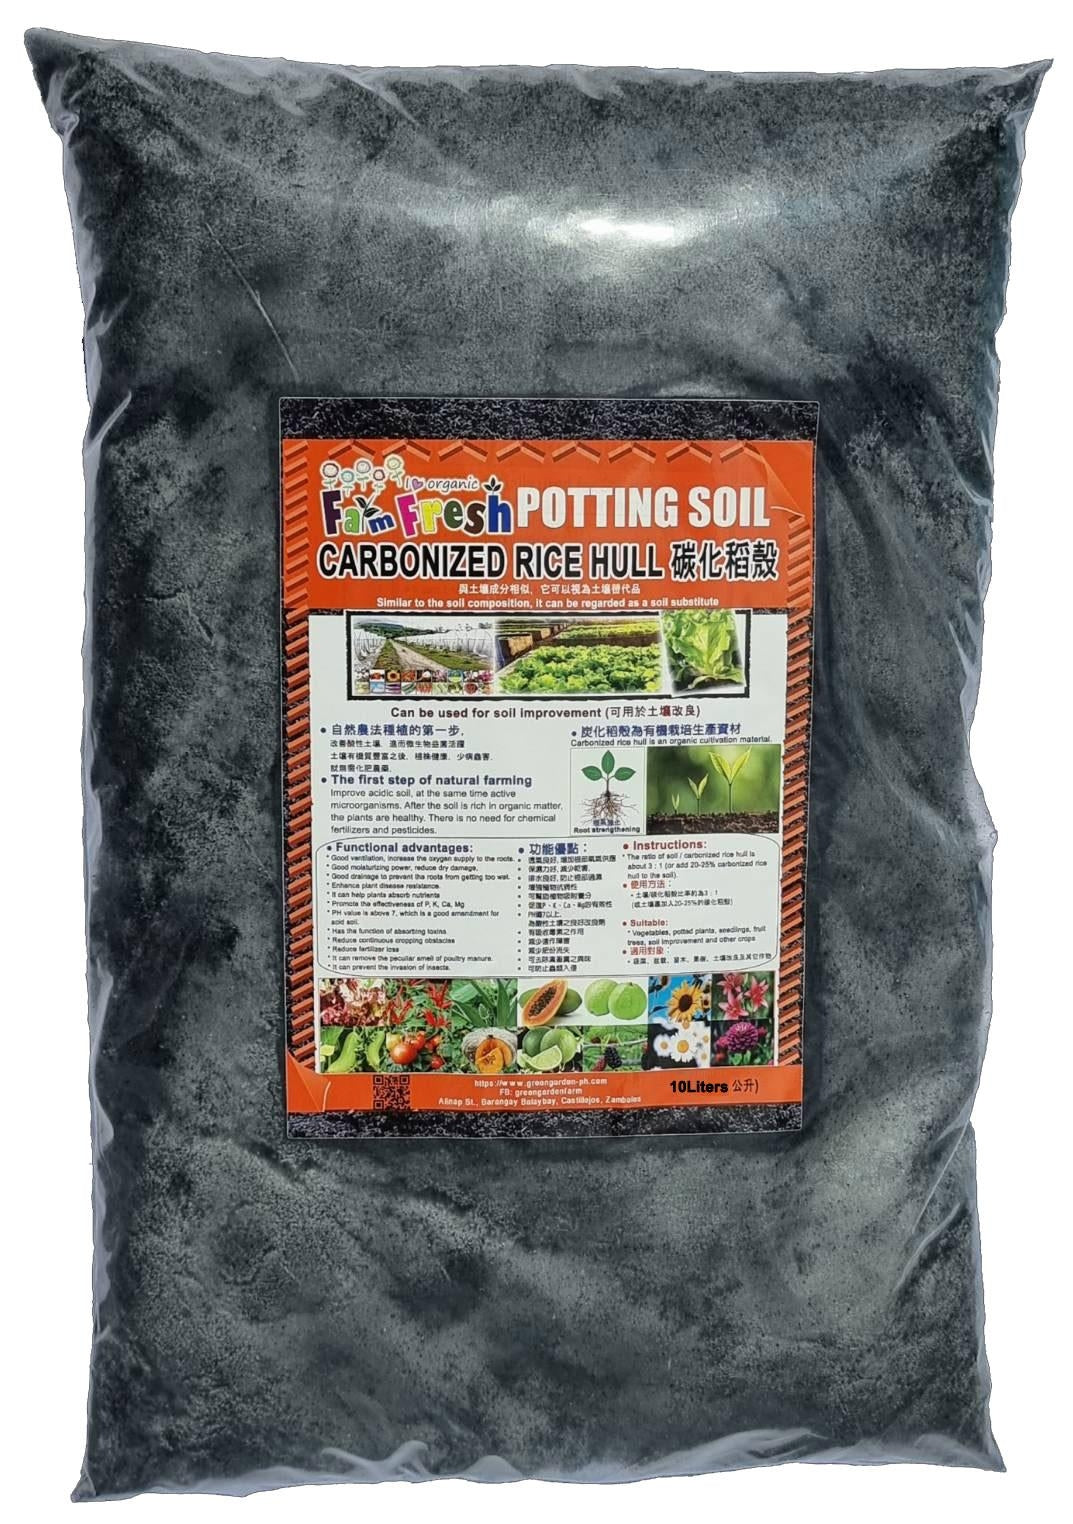 Carbonized Rice Hull Potting Soil (3 liters and 10 liters)